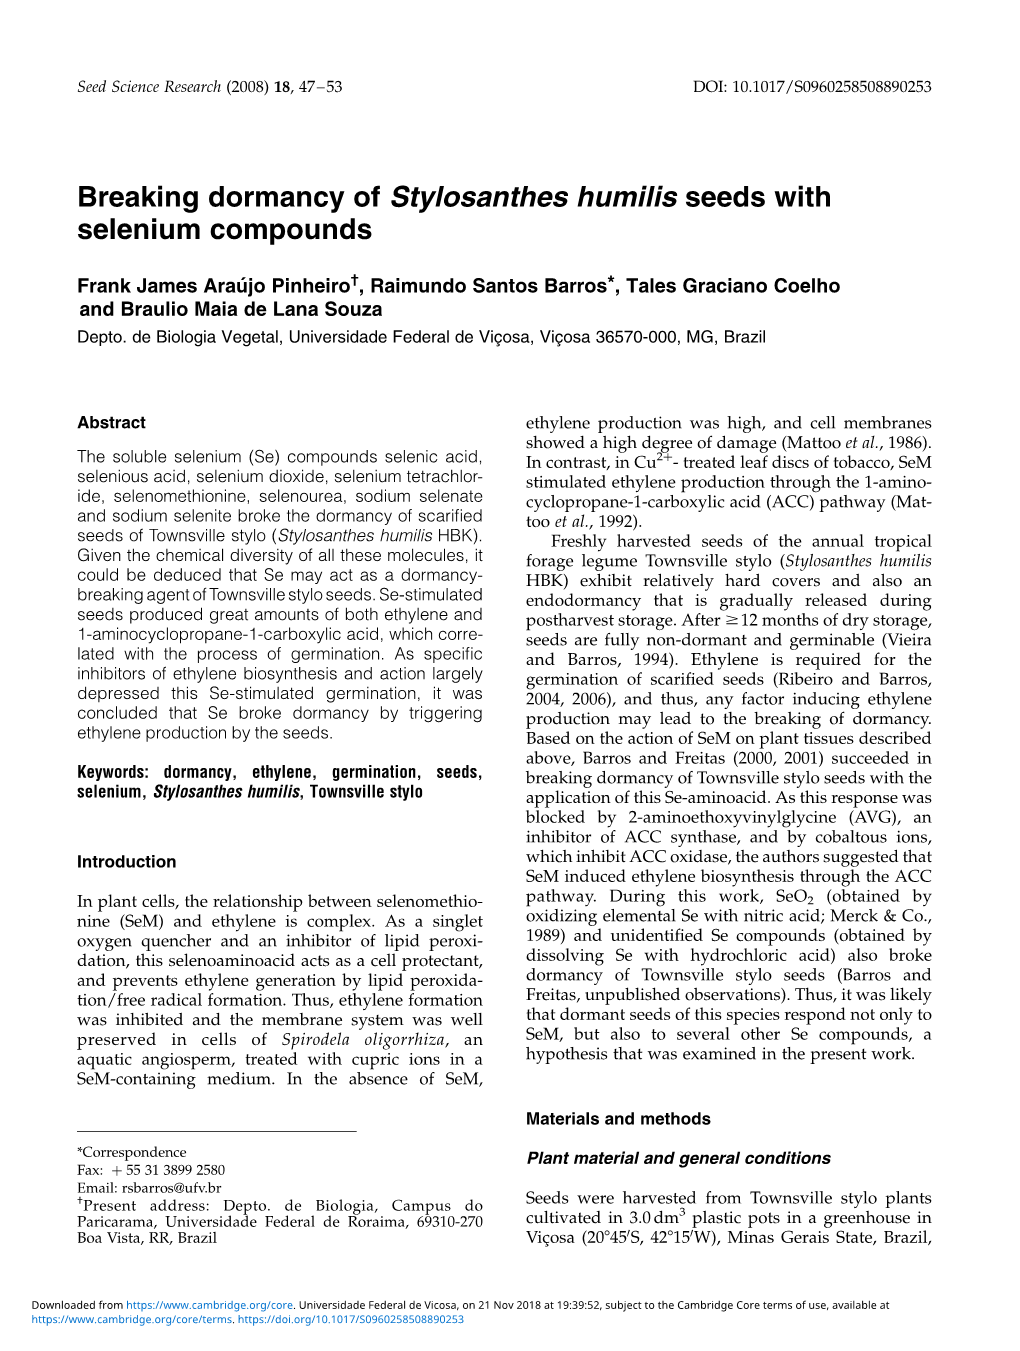 Breaking Dormancy of Stylosanthes Humilis Seeds with Selenium Compounds